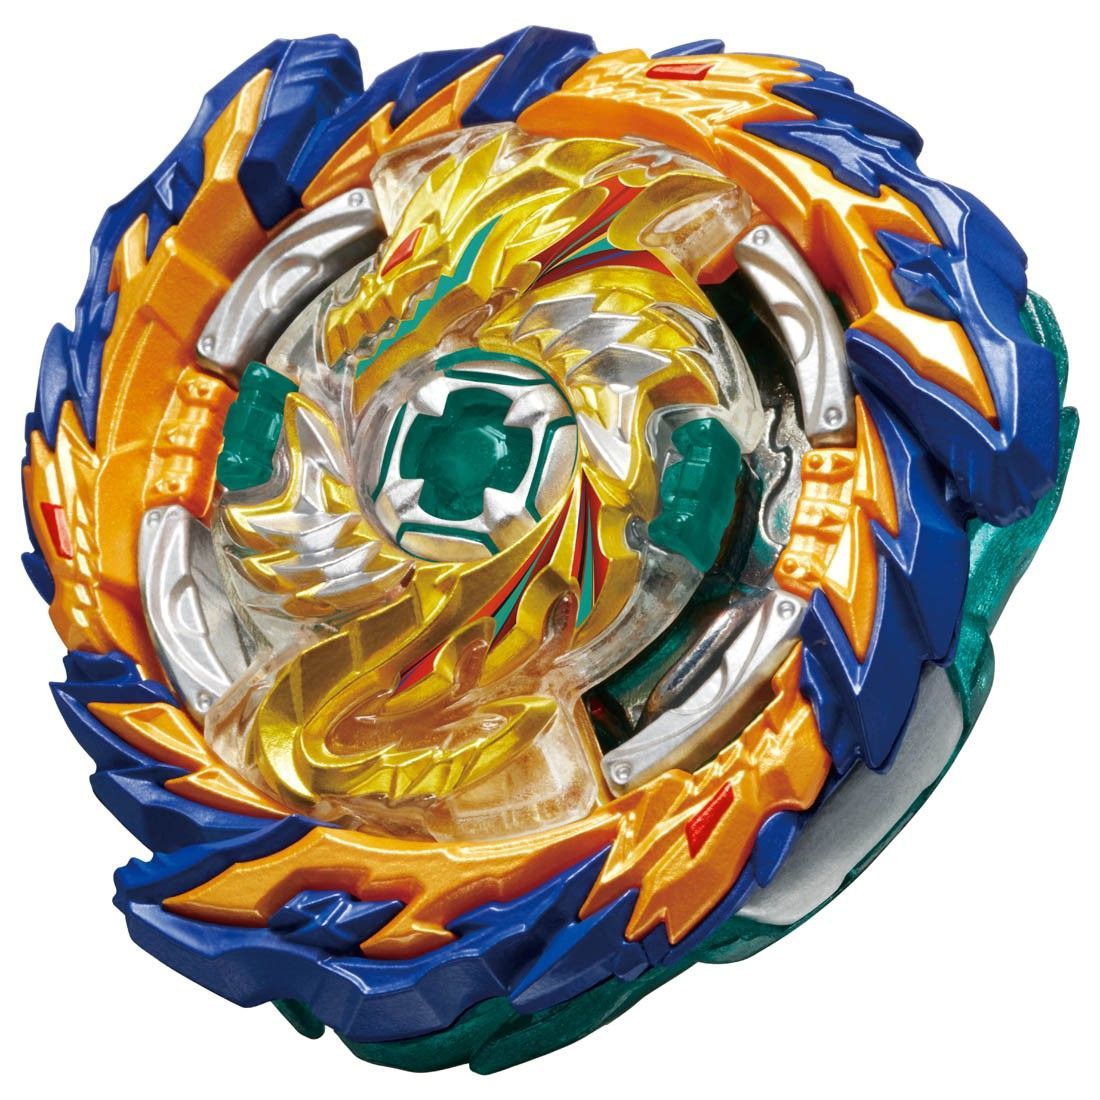 B 167 Booster Mirage Fafnir.Nt(Nothing Driver) 2S(stamina Type Chassis), The Evolution Of Wizard Fafnir.The Spark. Beyblade Burst, Pikachu Art, Beyblade Characters